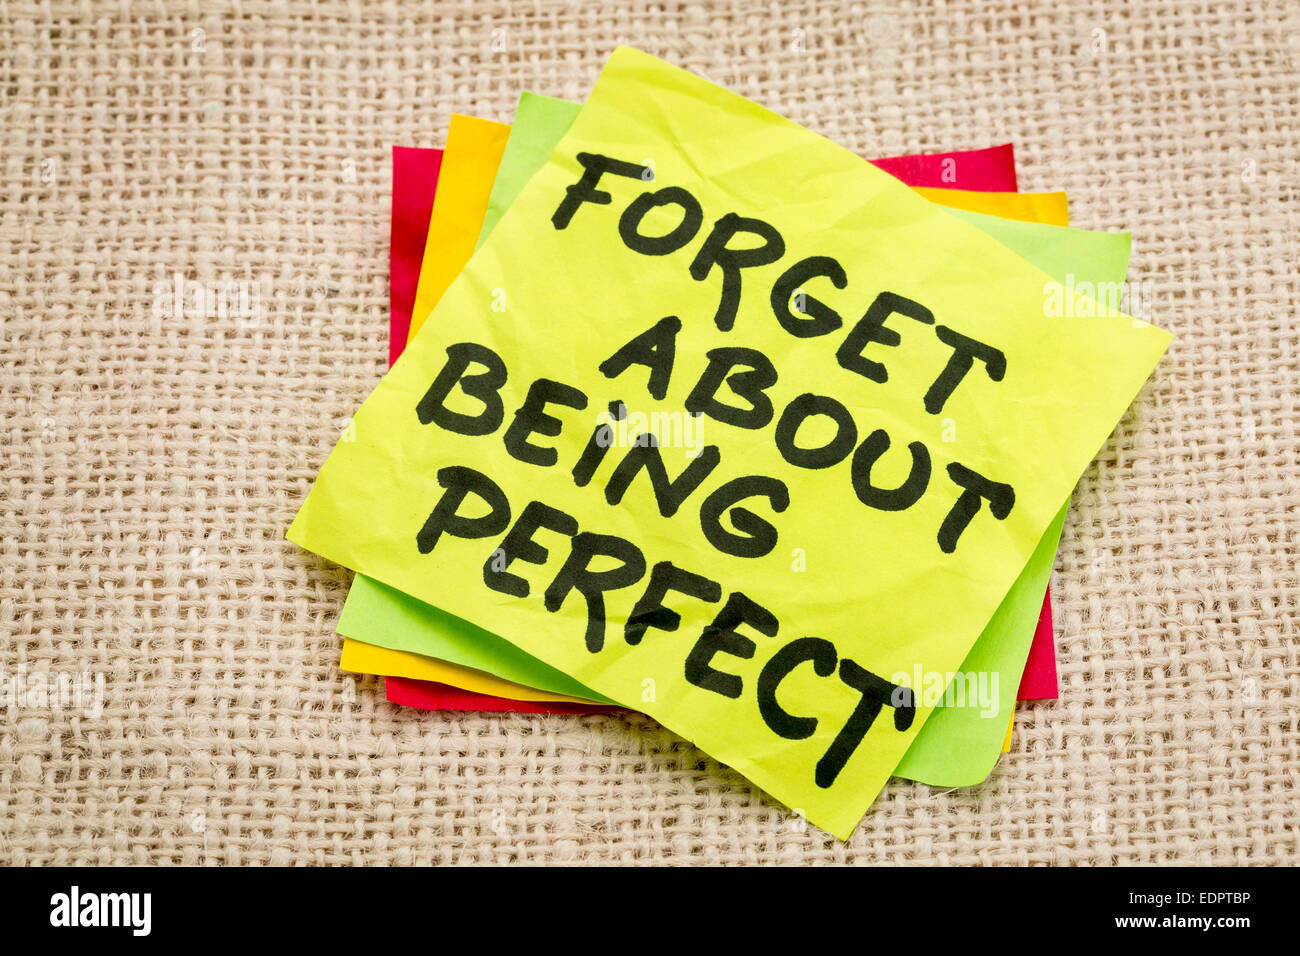 forget about being perfect - advice on a sticky note against burlap canvas Stock Photo